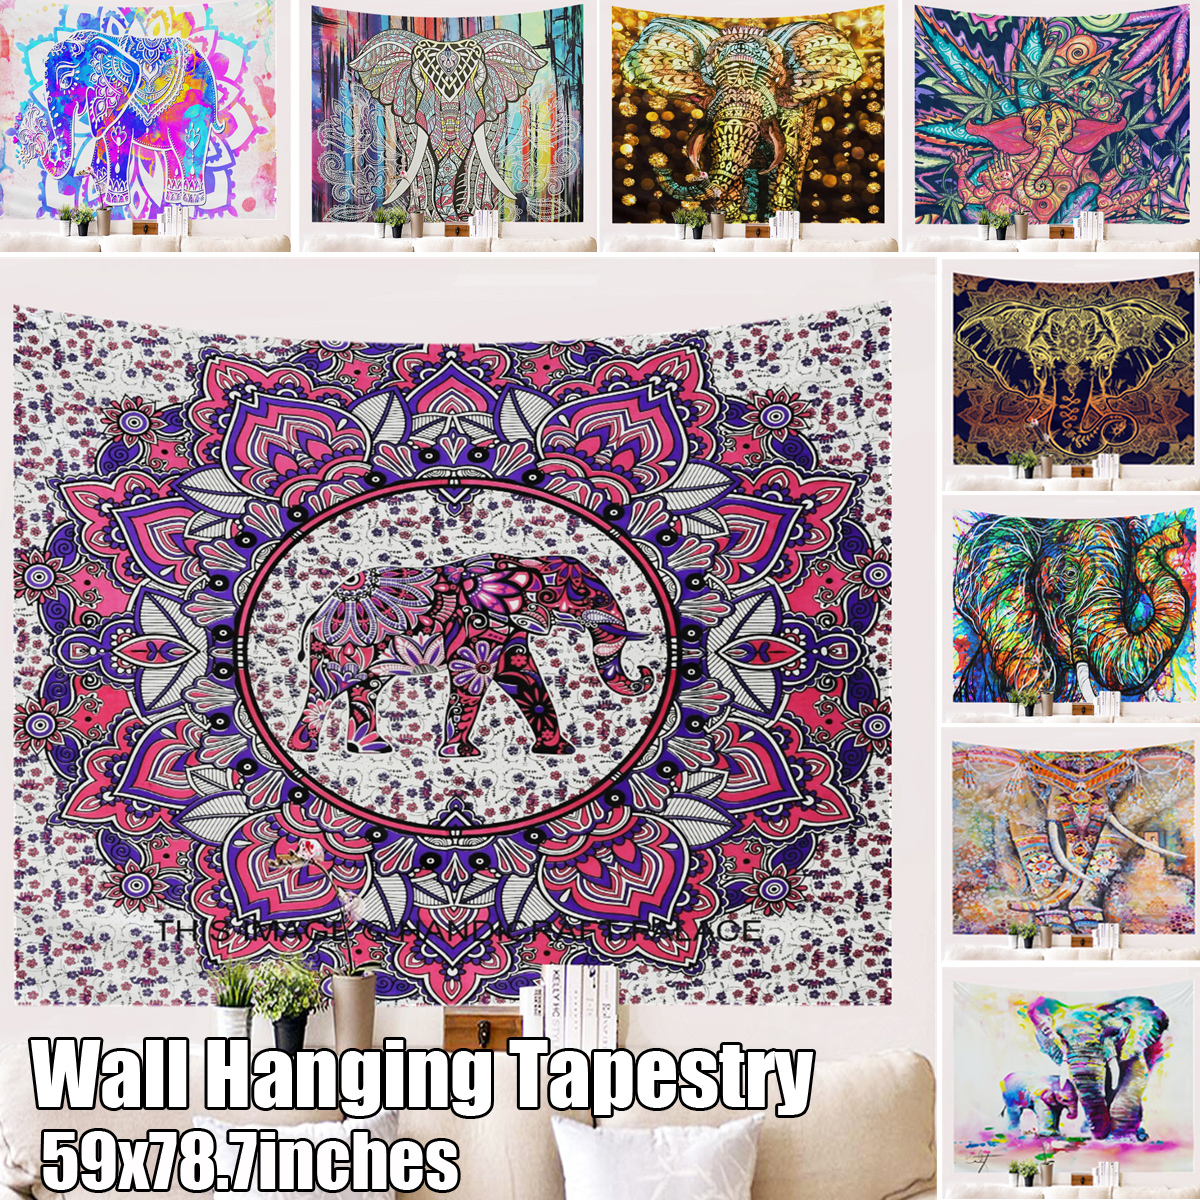 Colorful-Dye-Elephant-Tapestry-Wall-Hanging-Hippie-Tapestry-Colored-Printed-Decorative-Indian-Tapest-1751738-1